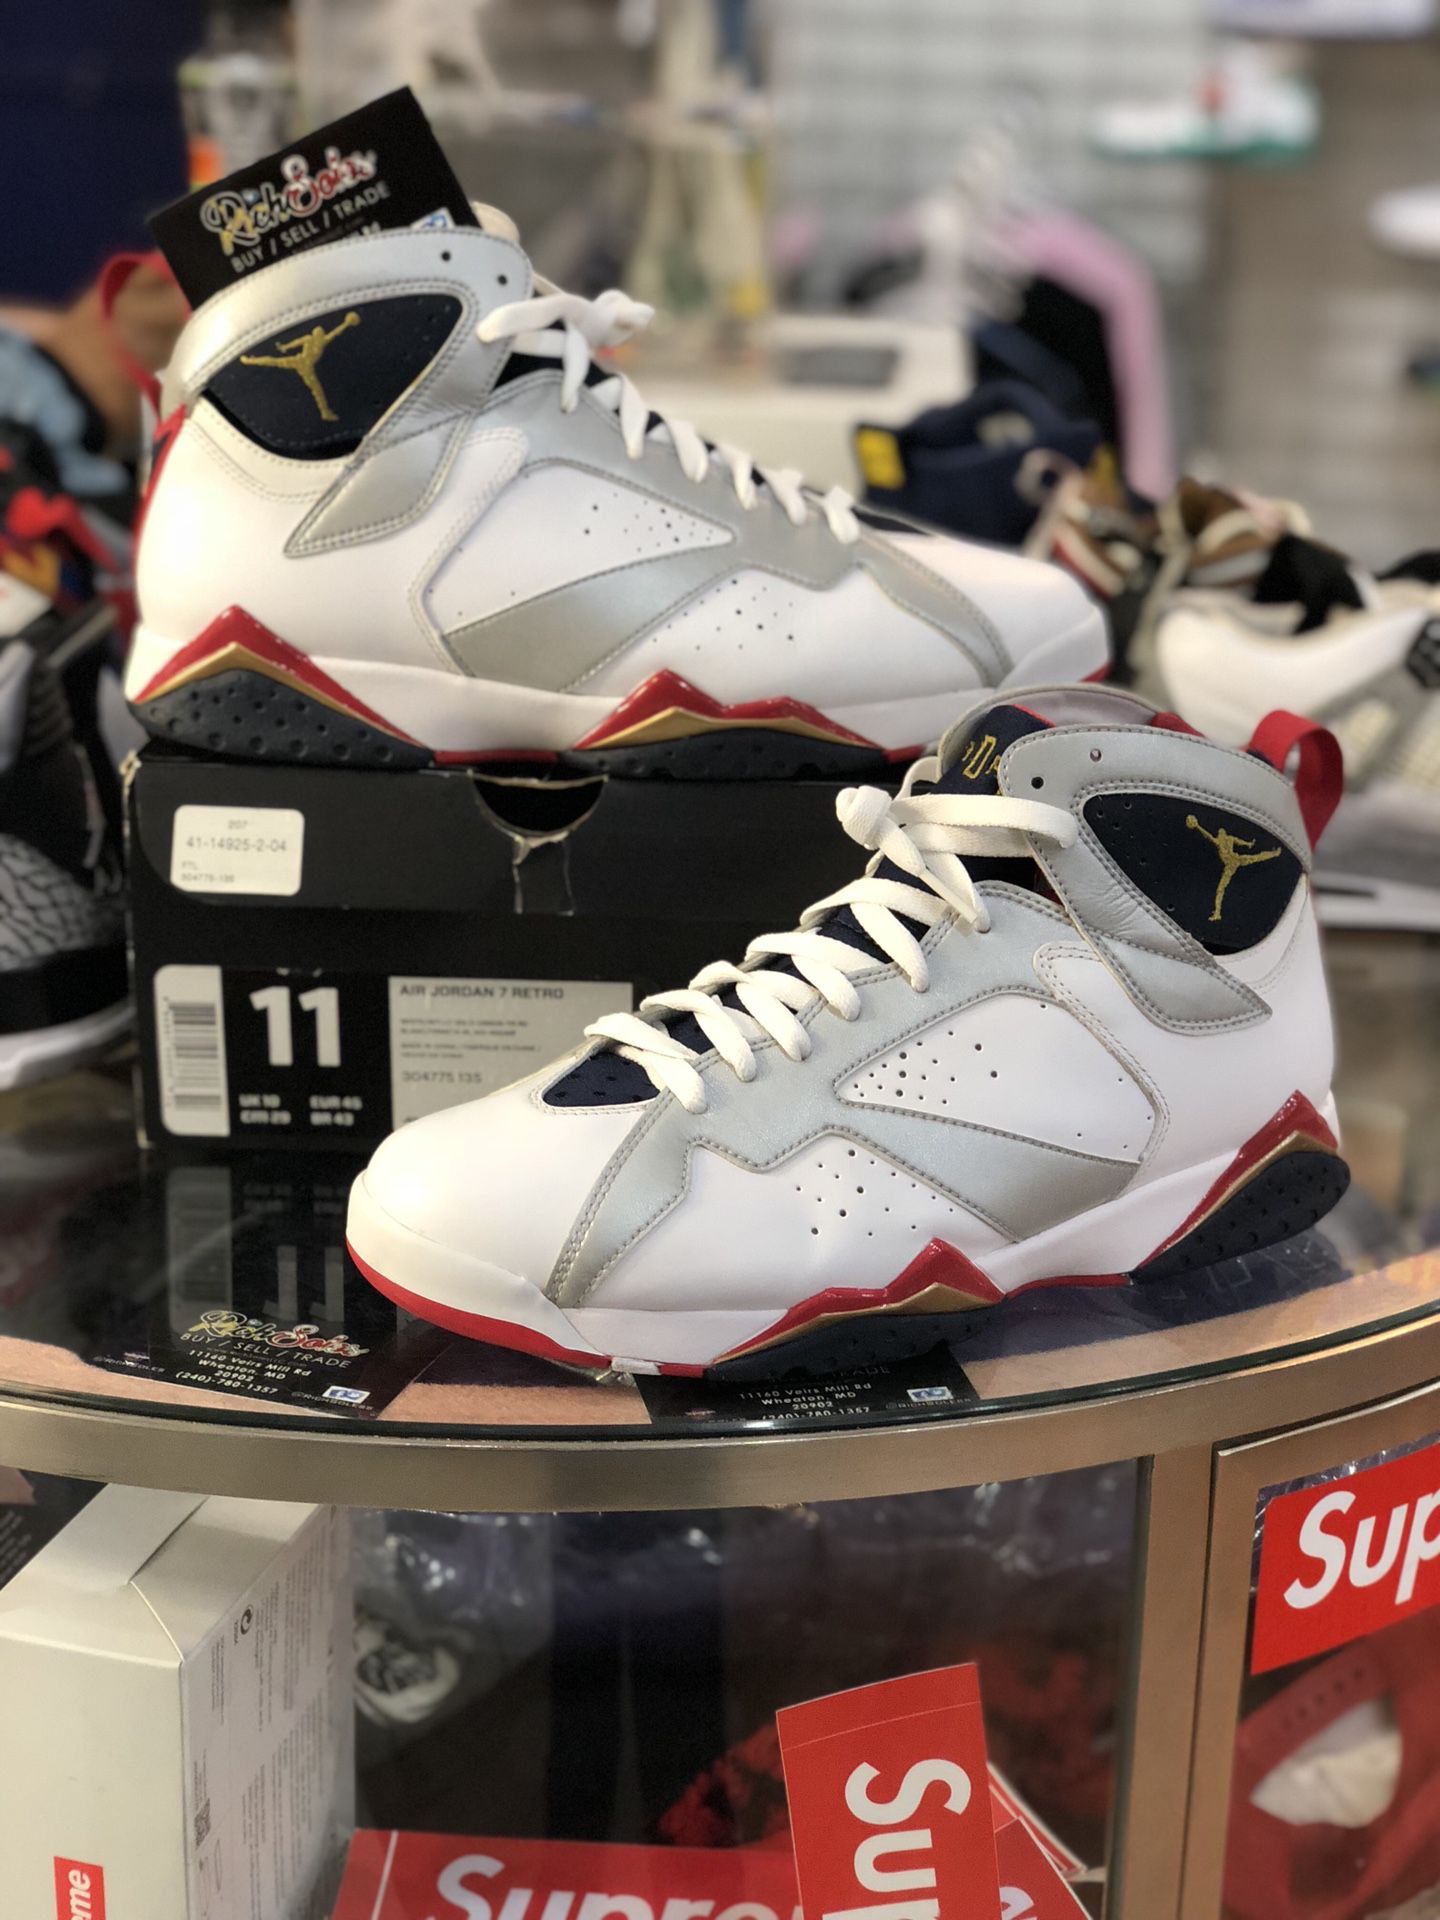 Olympic 7’s size 11